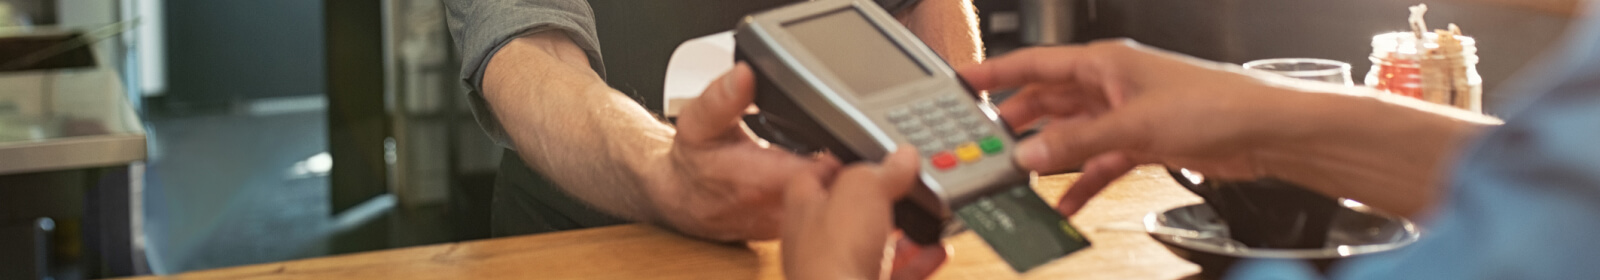 a person using a card reader to make a payment